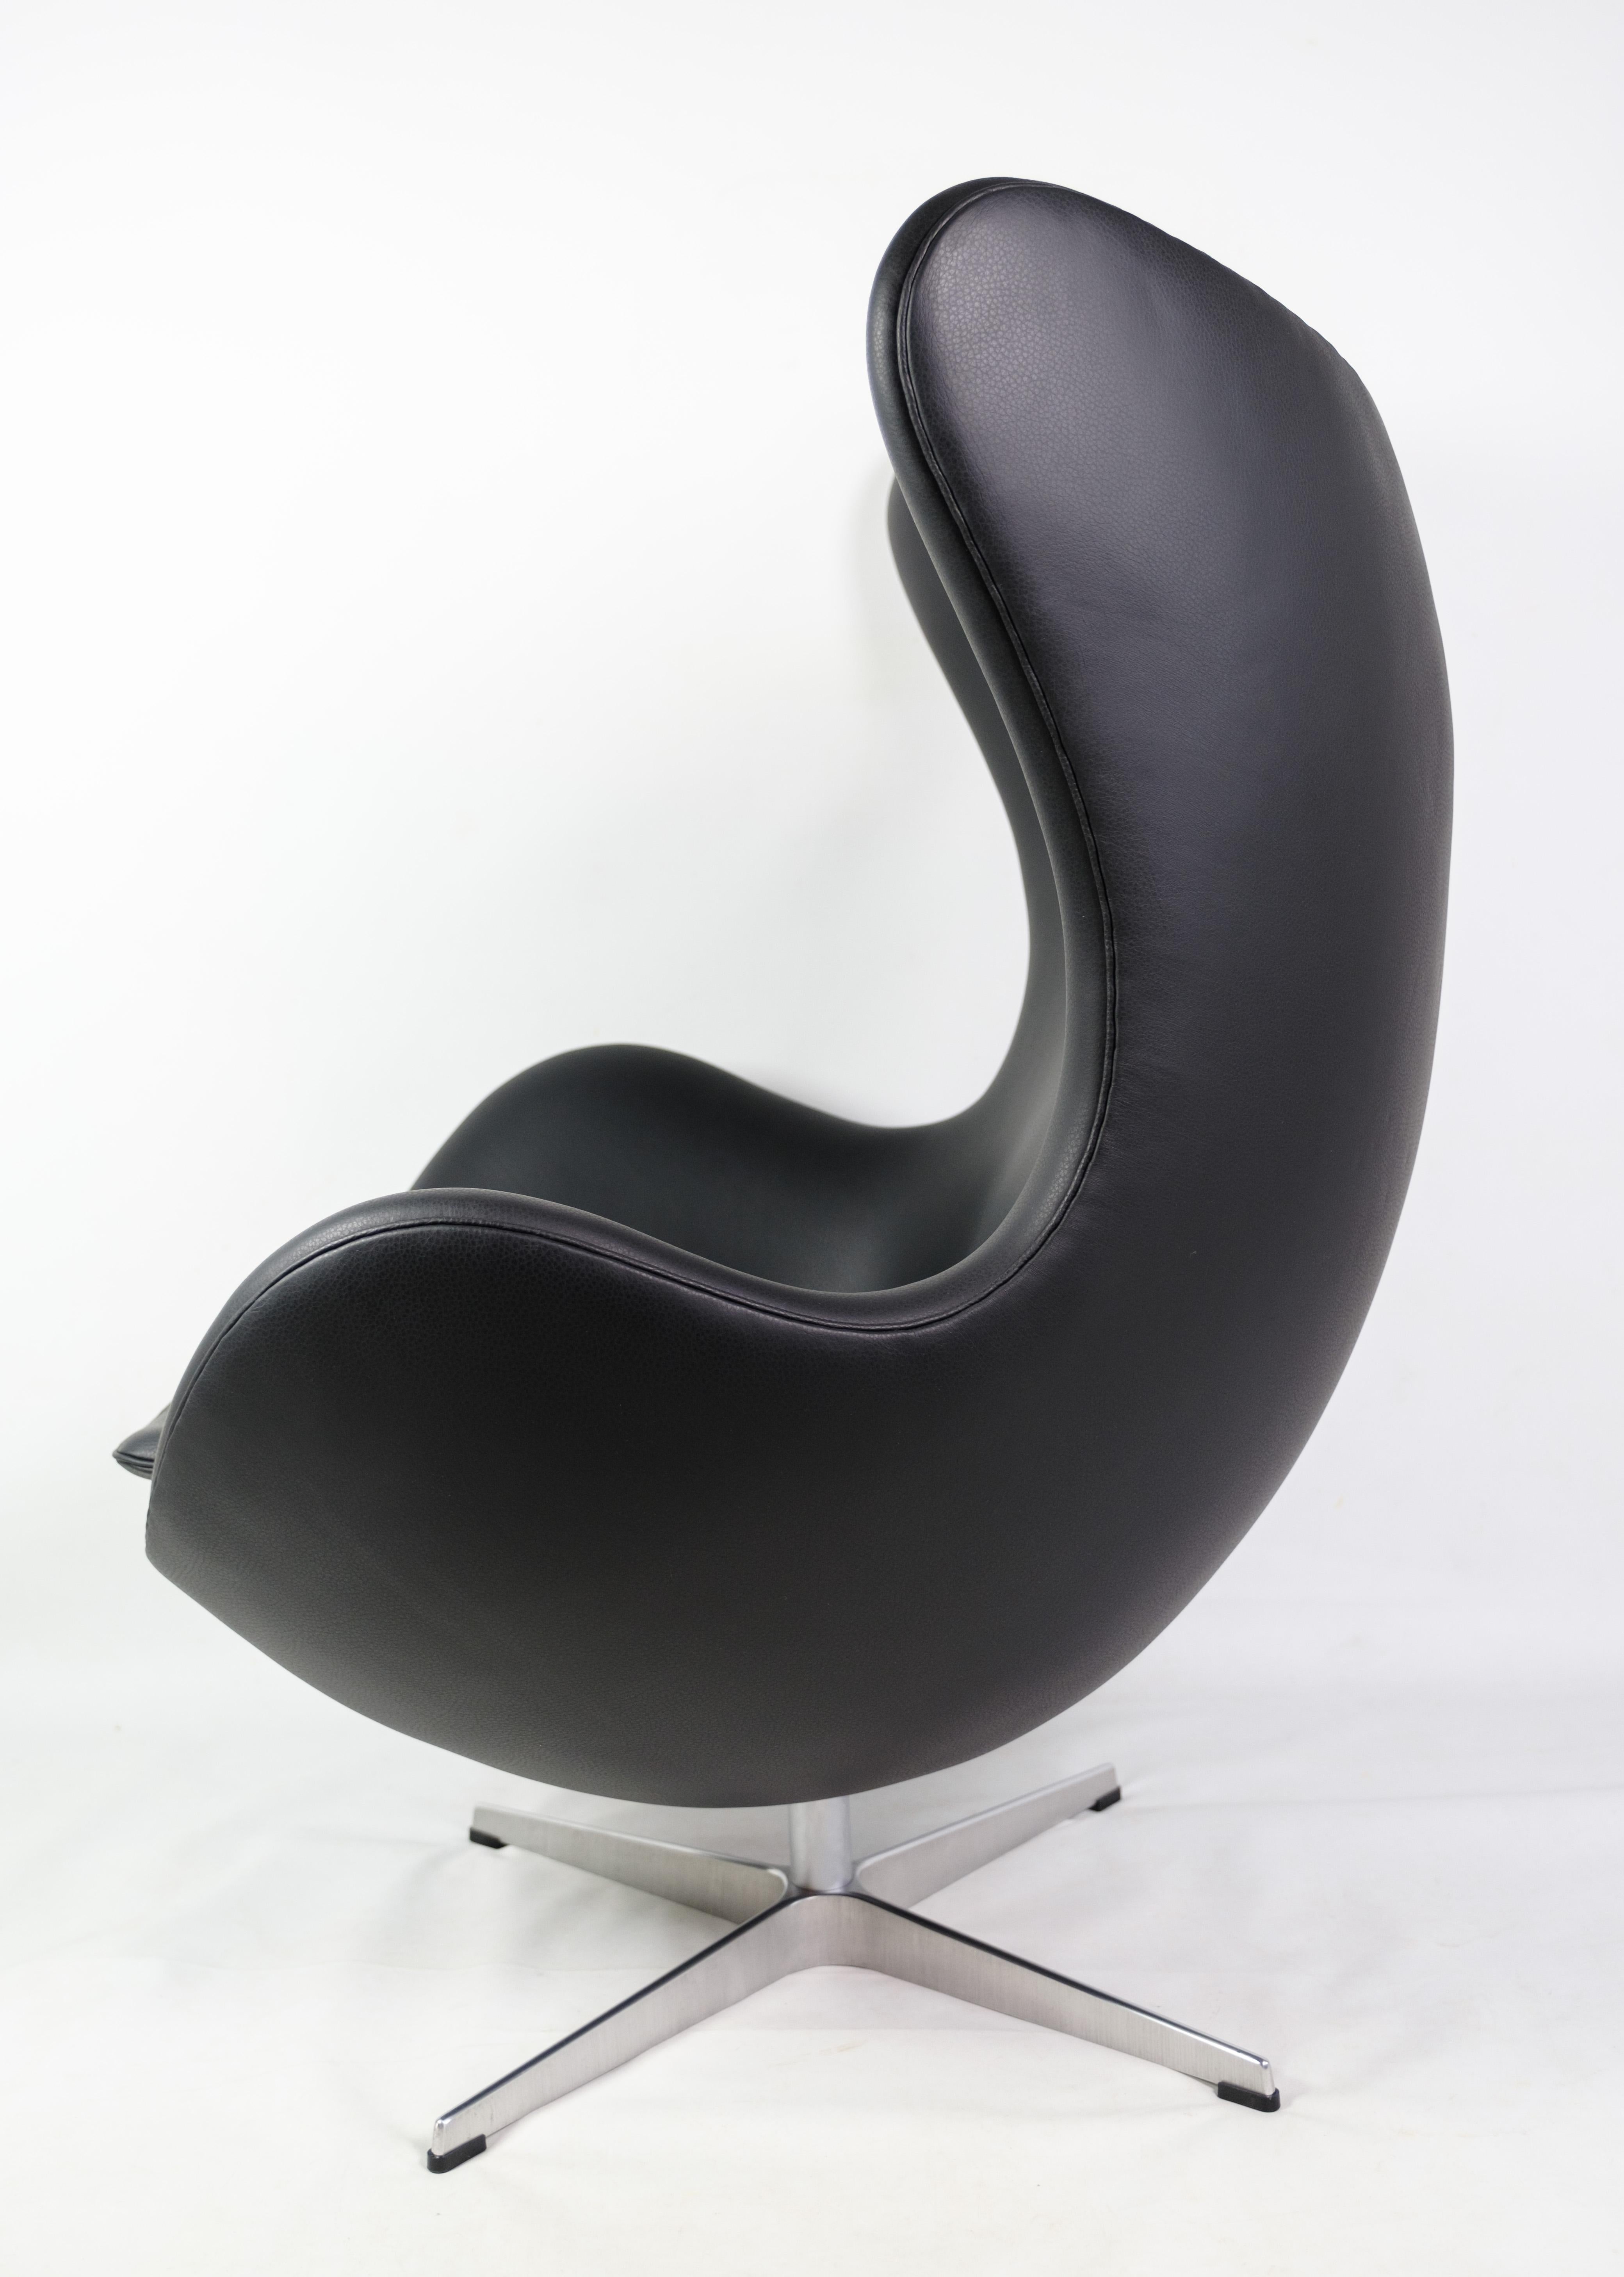 The egg, model 3316 designed by Arne Jacobsen in 1958 and manufactured by Fritz Hansen. The chair has original upholstery in black elegance leather.

This product will be inspected thoroughly at our professional workshop by our educated employees,